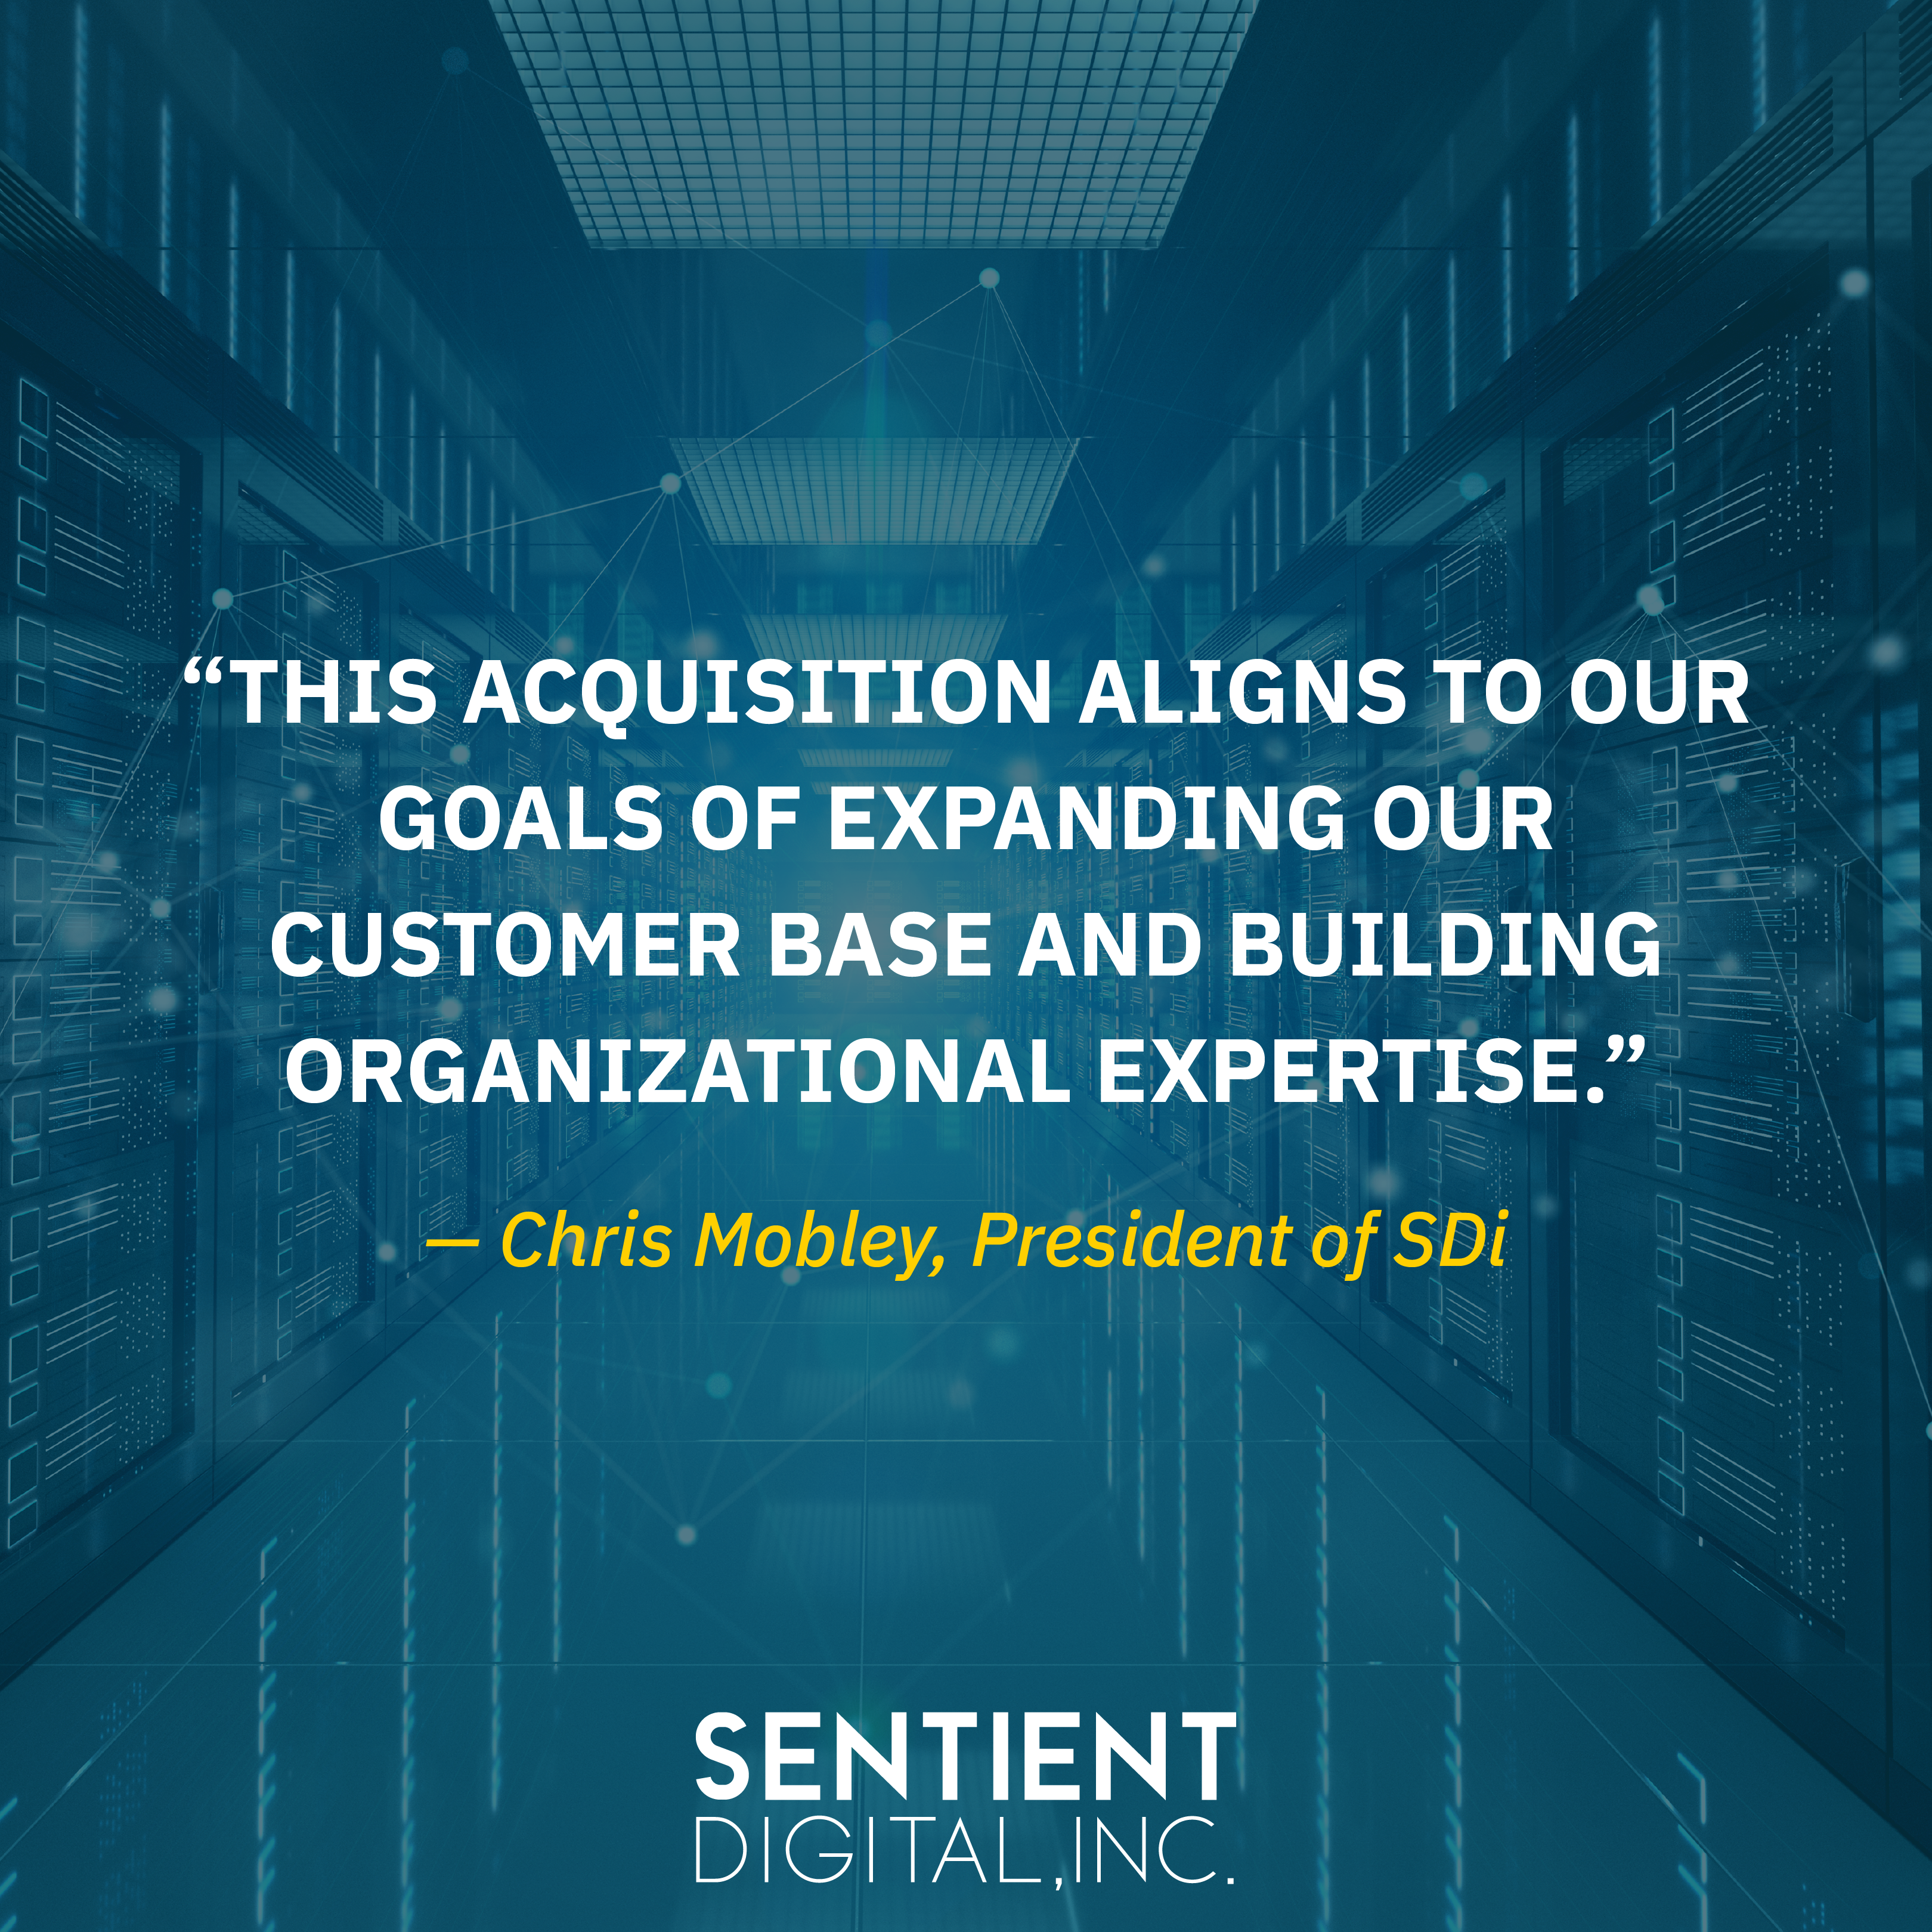 Check out this graphic or keep reading to see what Chris Mobley, SDi's President, had to say about SDi's acquisition of RDA.